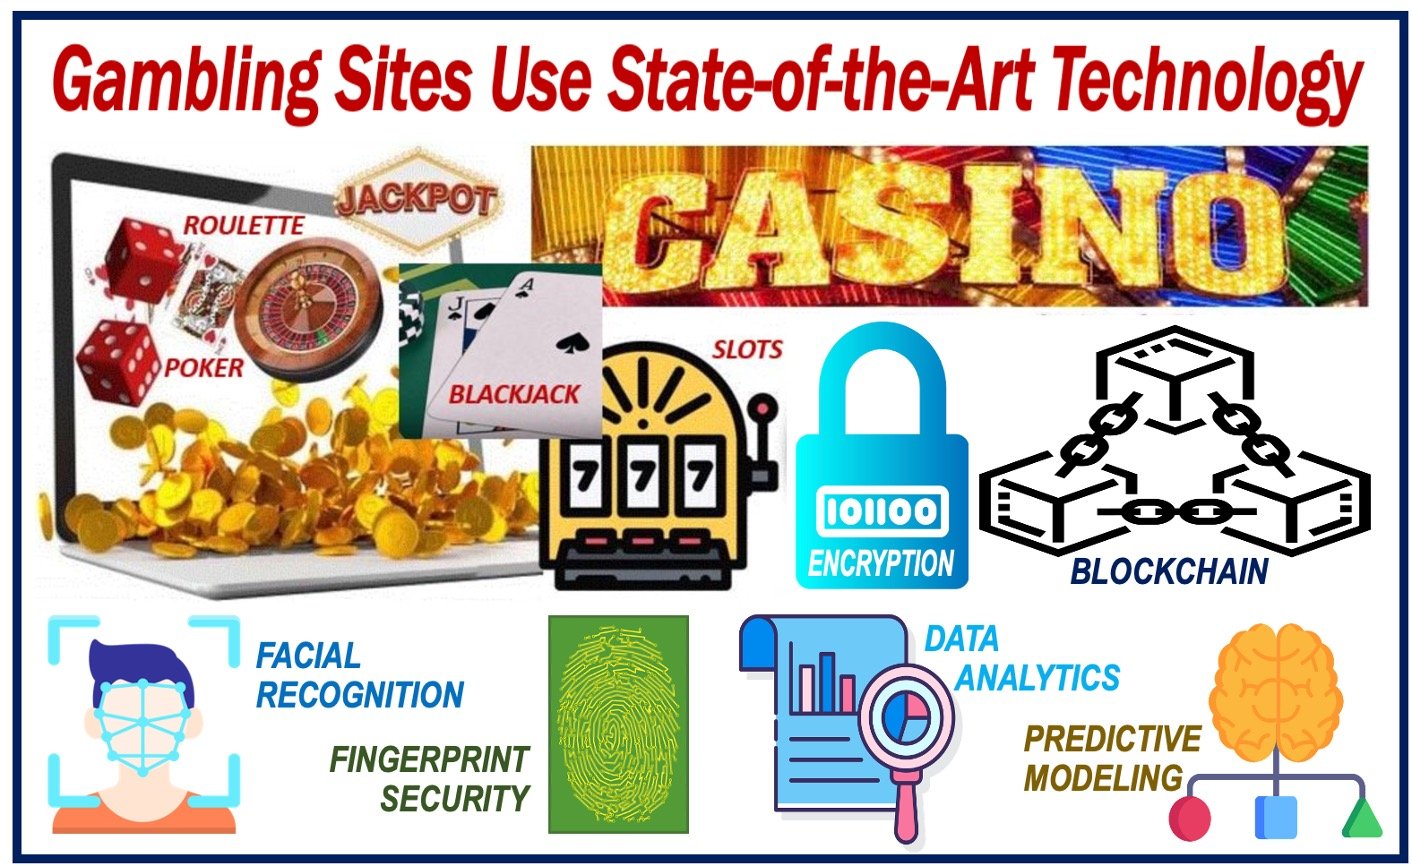 Image depicting tech advabces in gambling sites